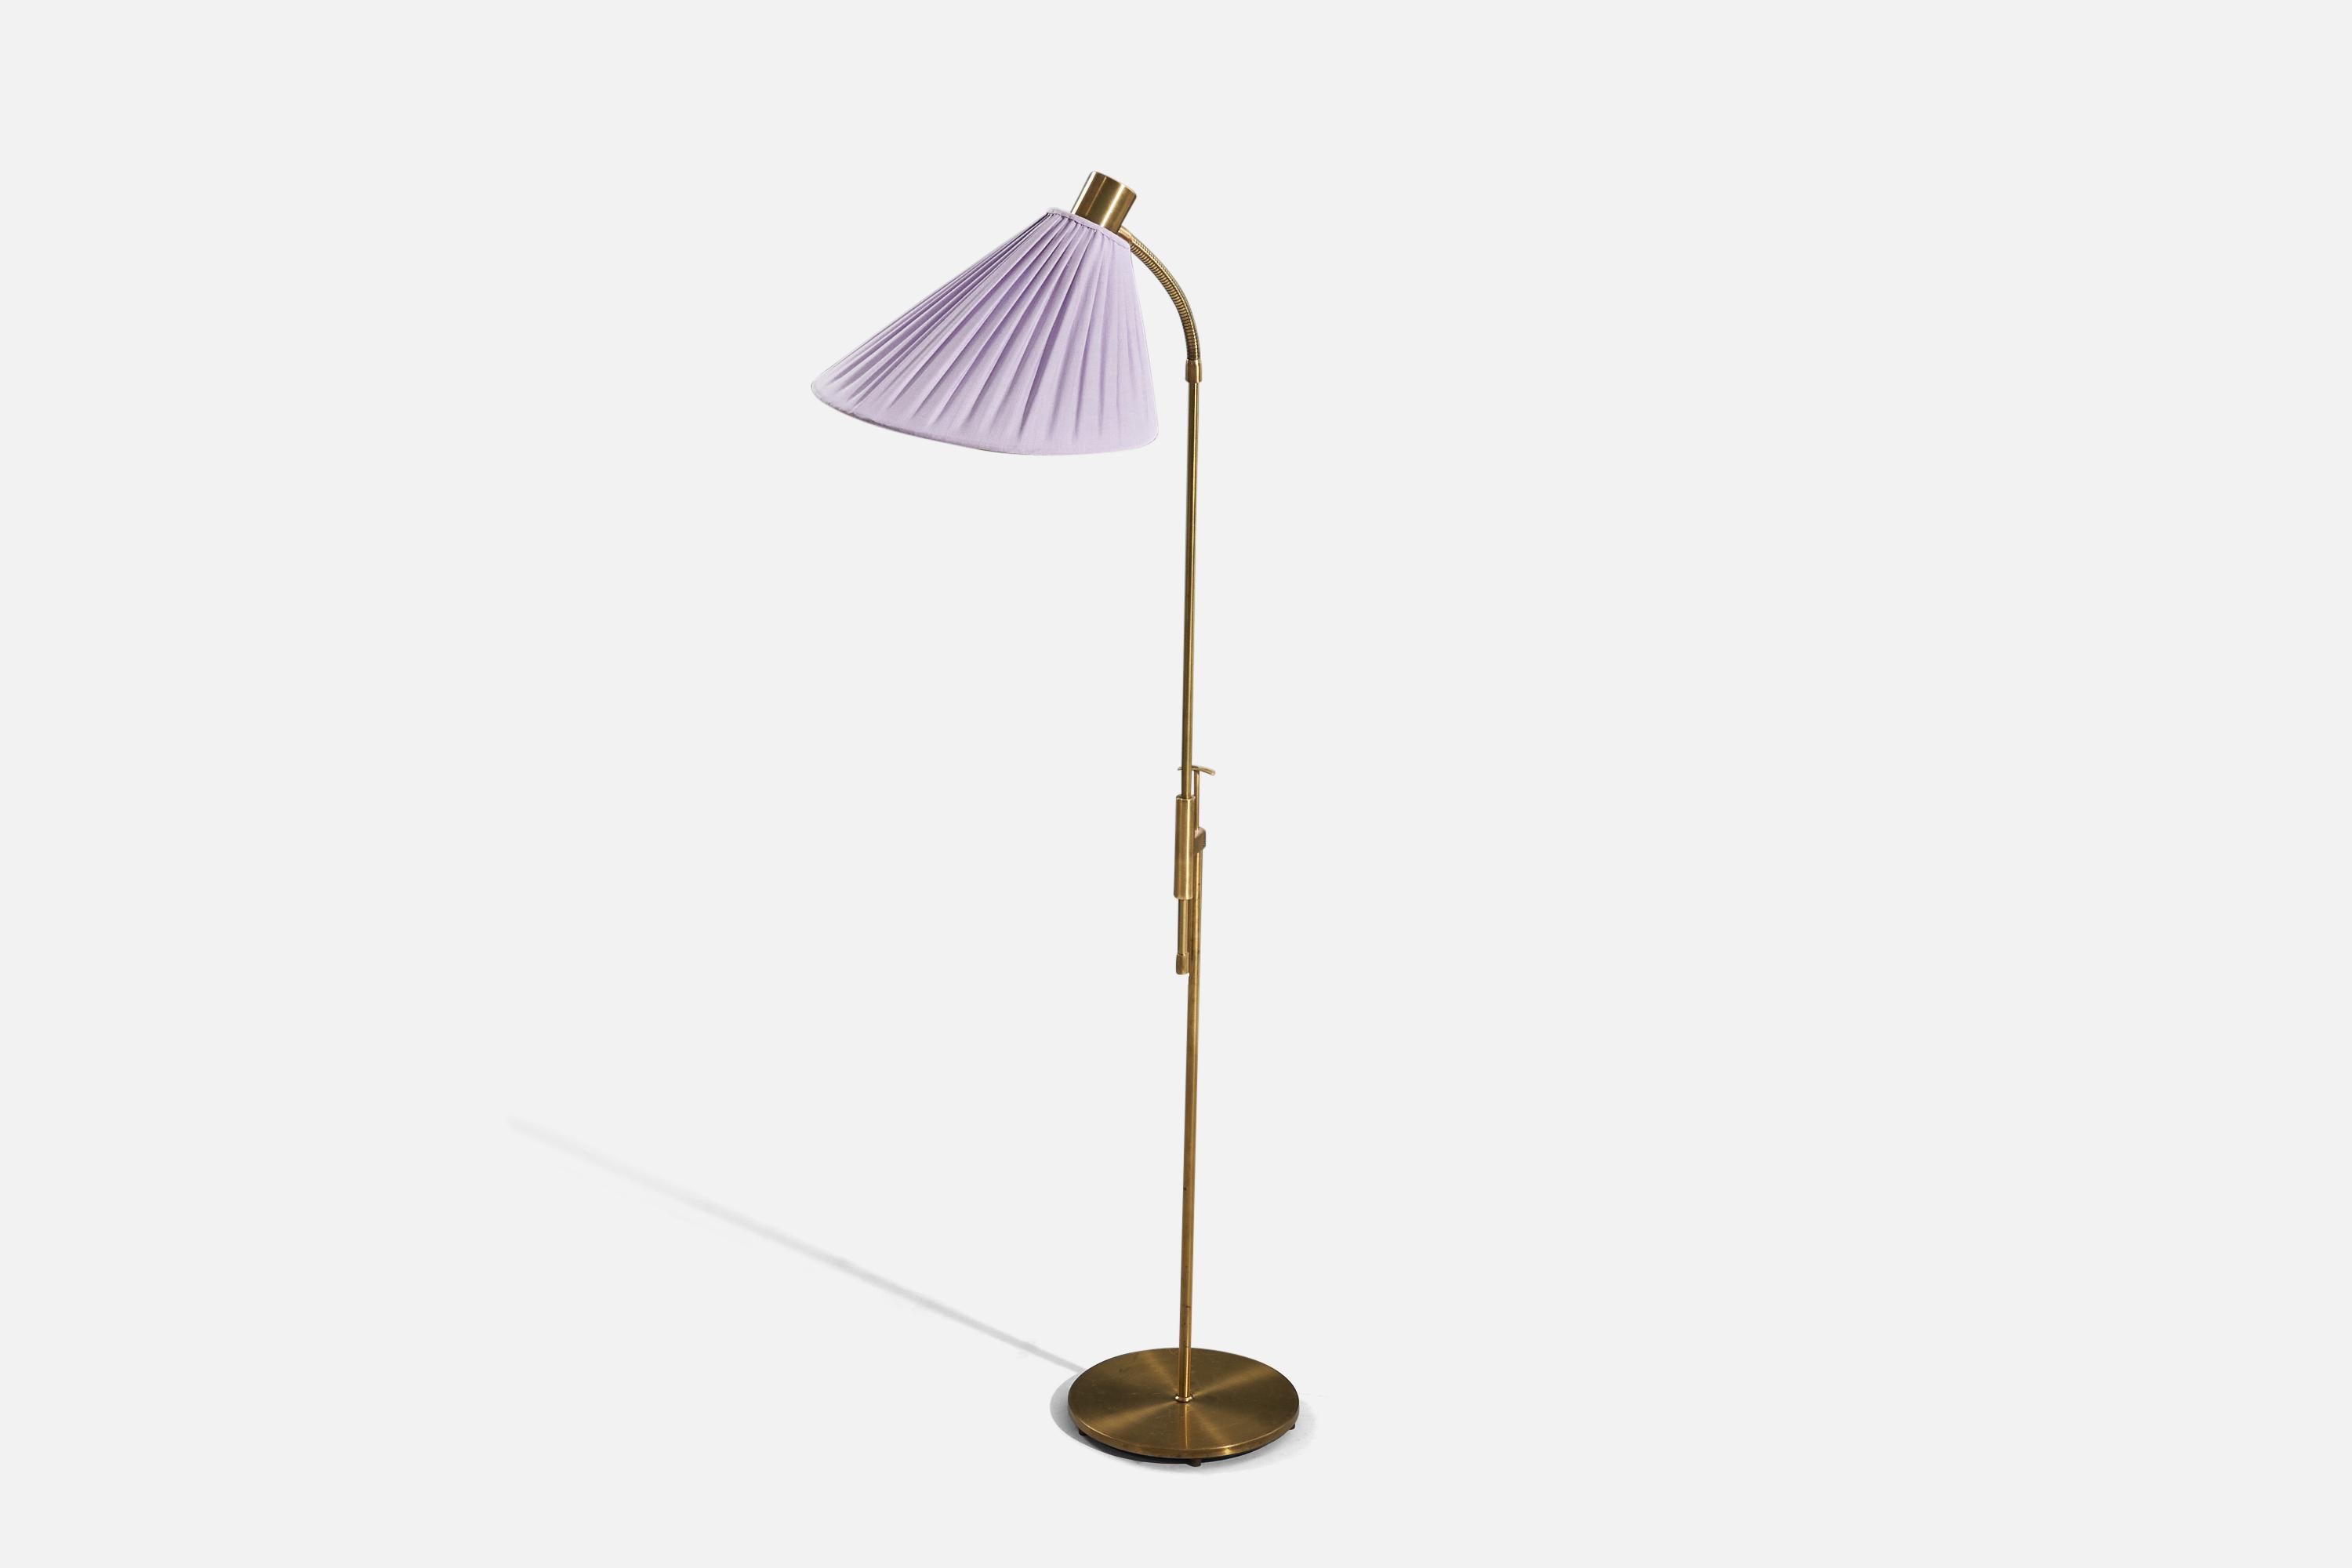 Falkenberg Belysning, Adjustable Floor Lamp, Brass, Fabric, Sweden, 1970s In Good Condition For Sale In High Point, NC